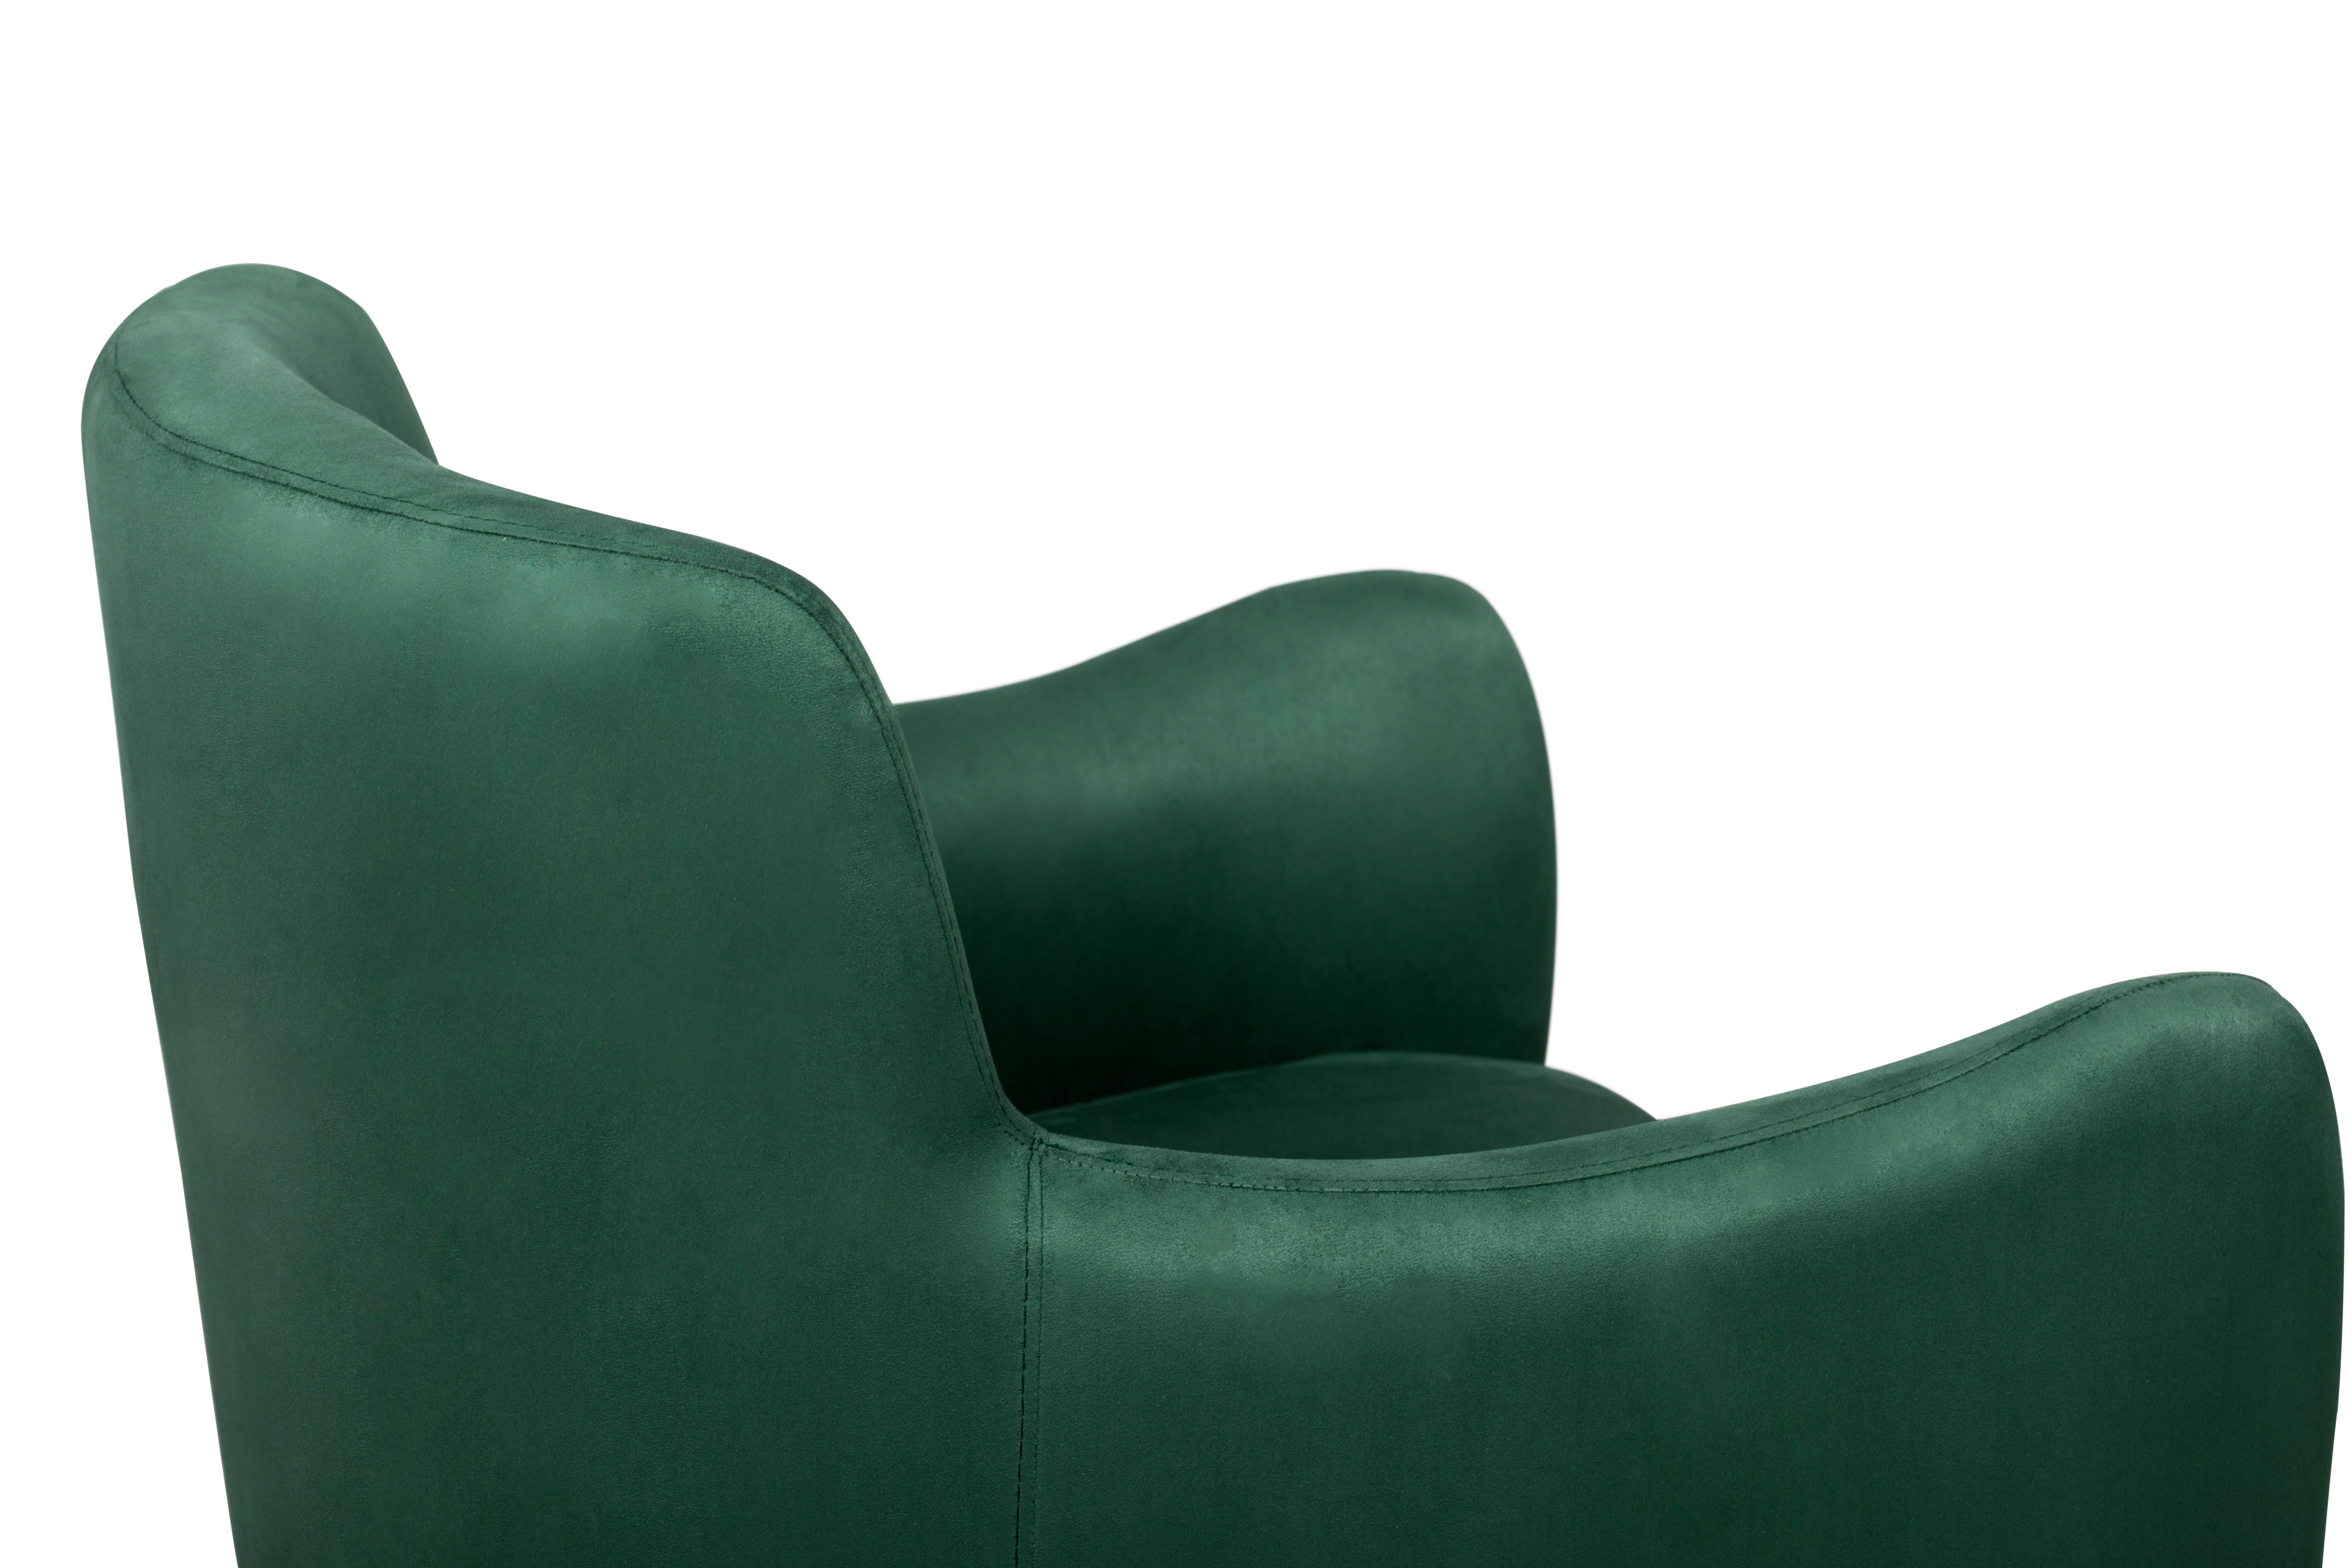 Dandridge Armchair in Green In New Condition For Sale In New York, NY